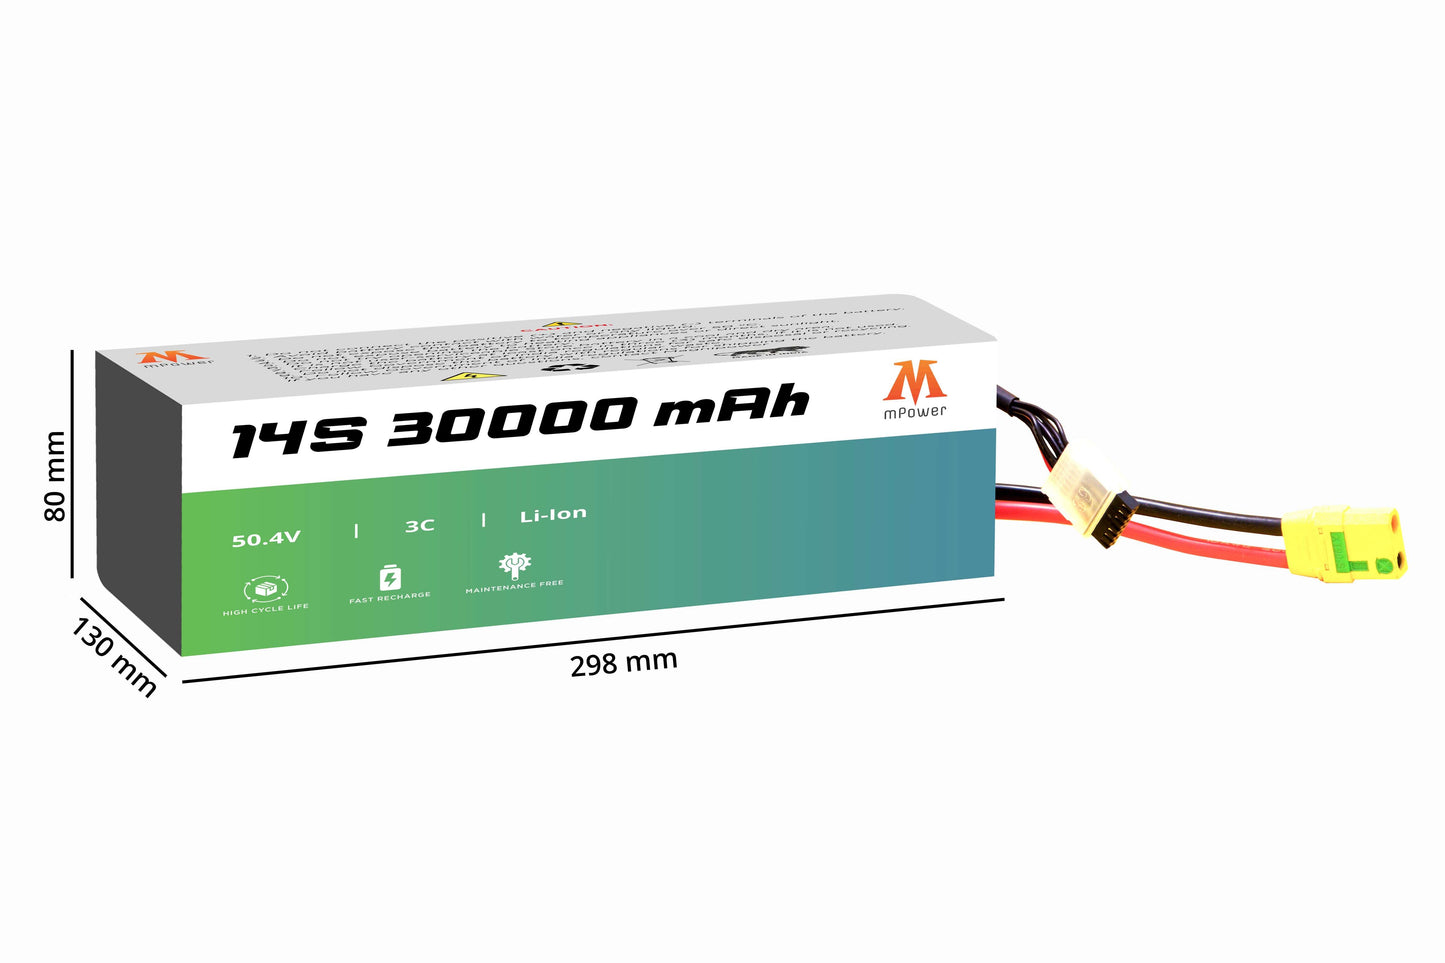 mPower 14S 30000mAh Lithium-Ion Battery for Survey Drones